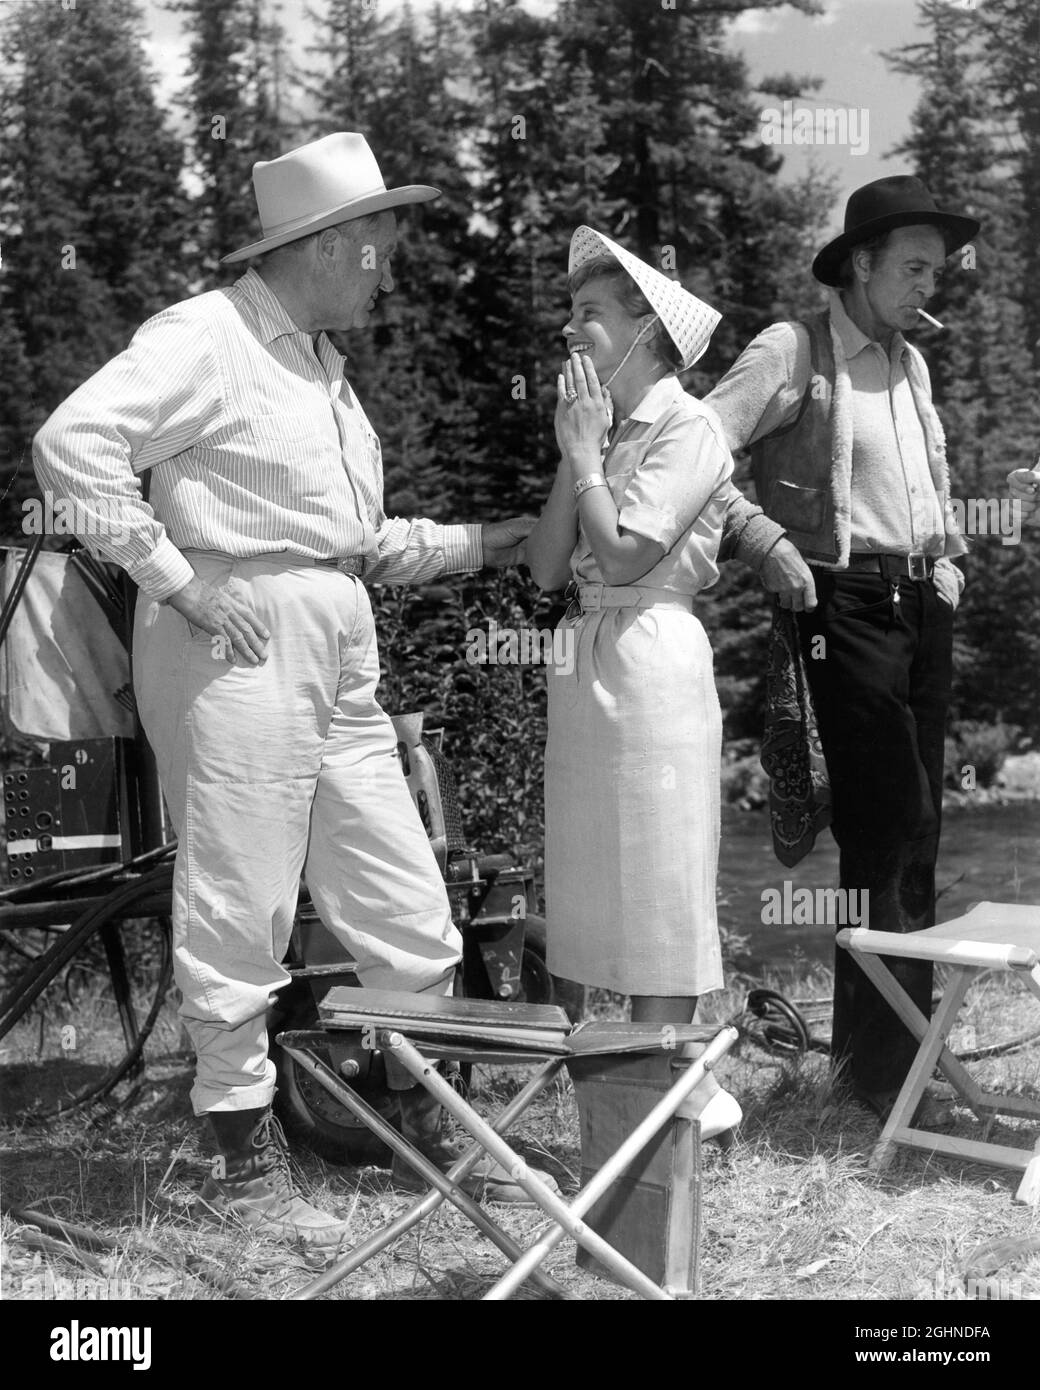 Director DELMER DAVES MARIA SCHELL and GARY COOPER on set location candid during filming of THE HANGING TREE 1959 director DELMER DAVES novel Dorothy M. Johnson music Max Steiner Baroda / Warner Bros. Stock Photo